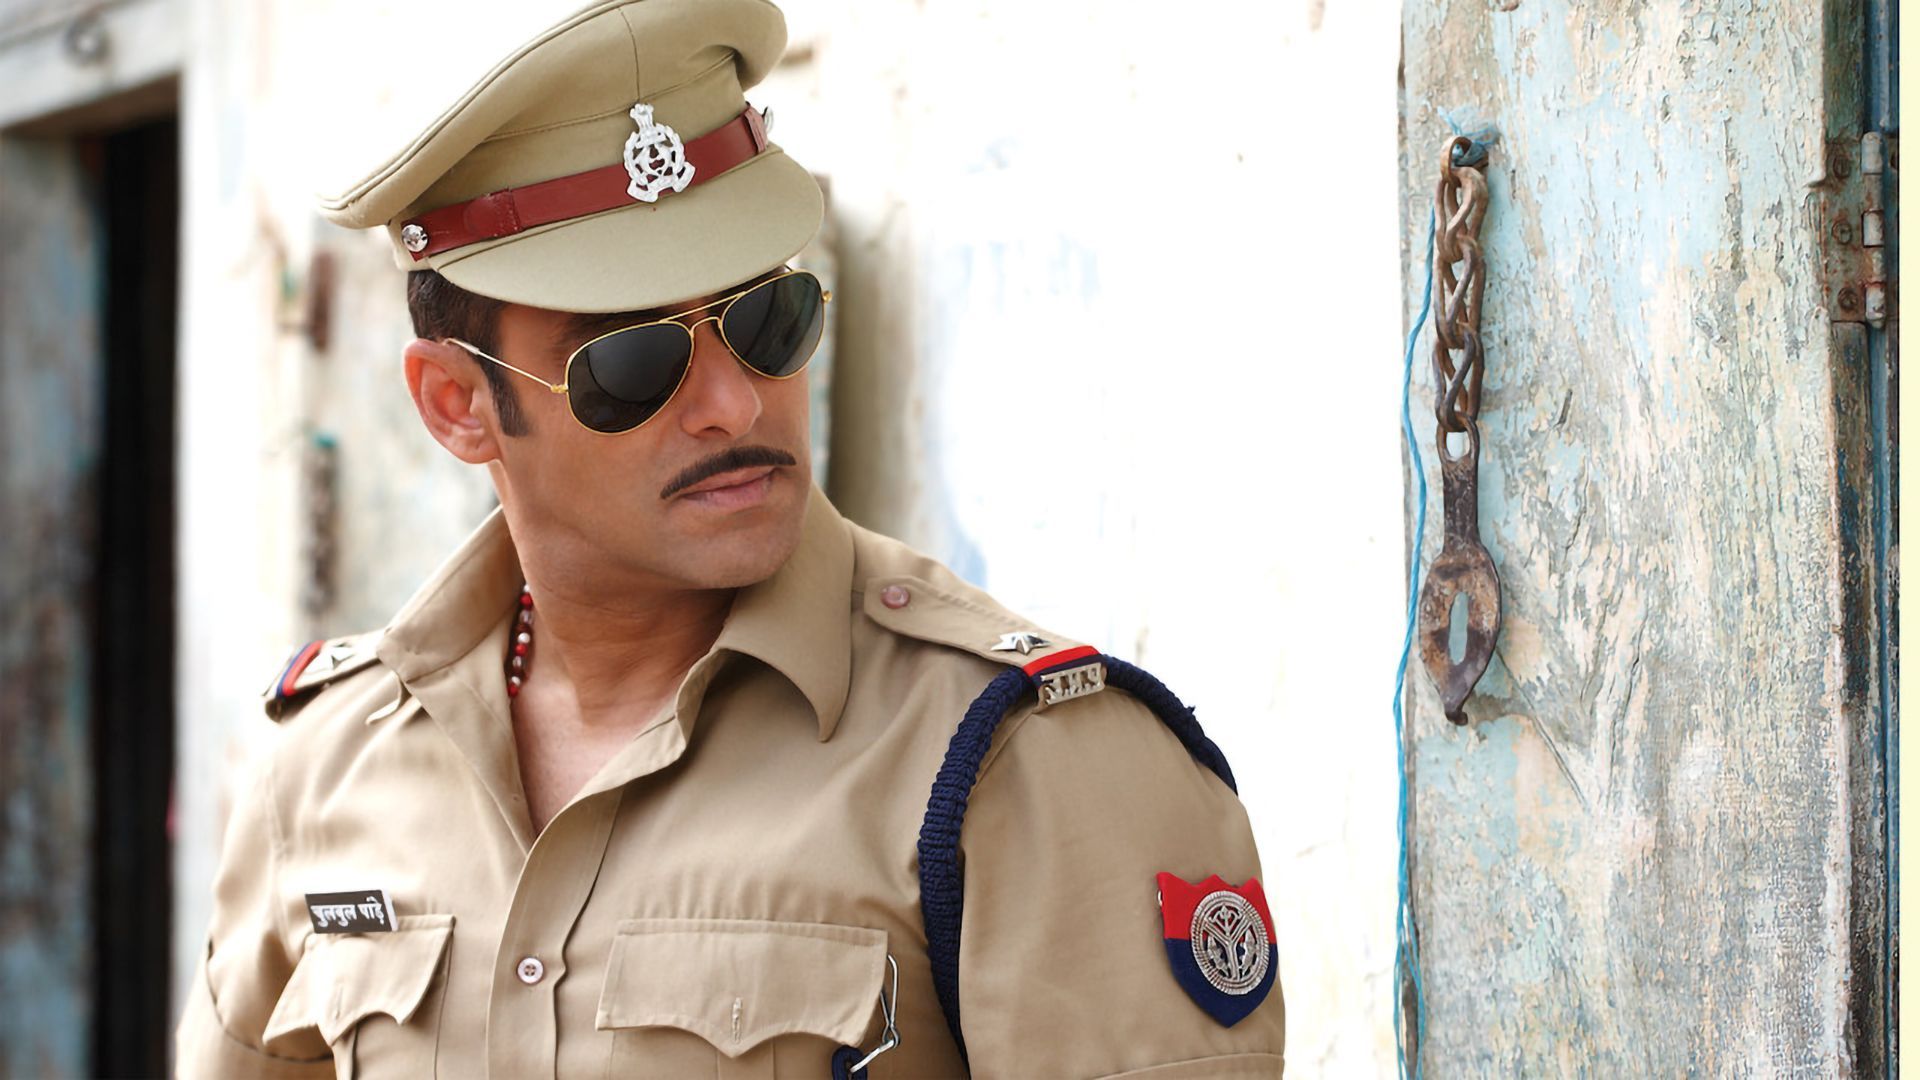 Sub Inspector Wallpapers - Top Free Sub Inspector Backgrounds ...